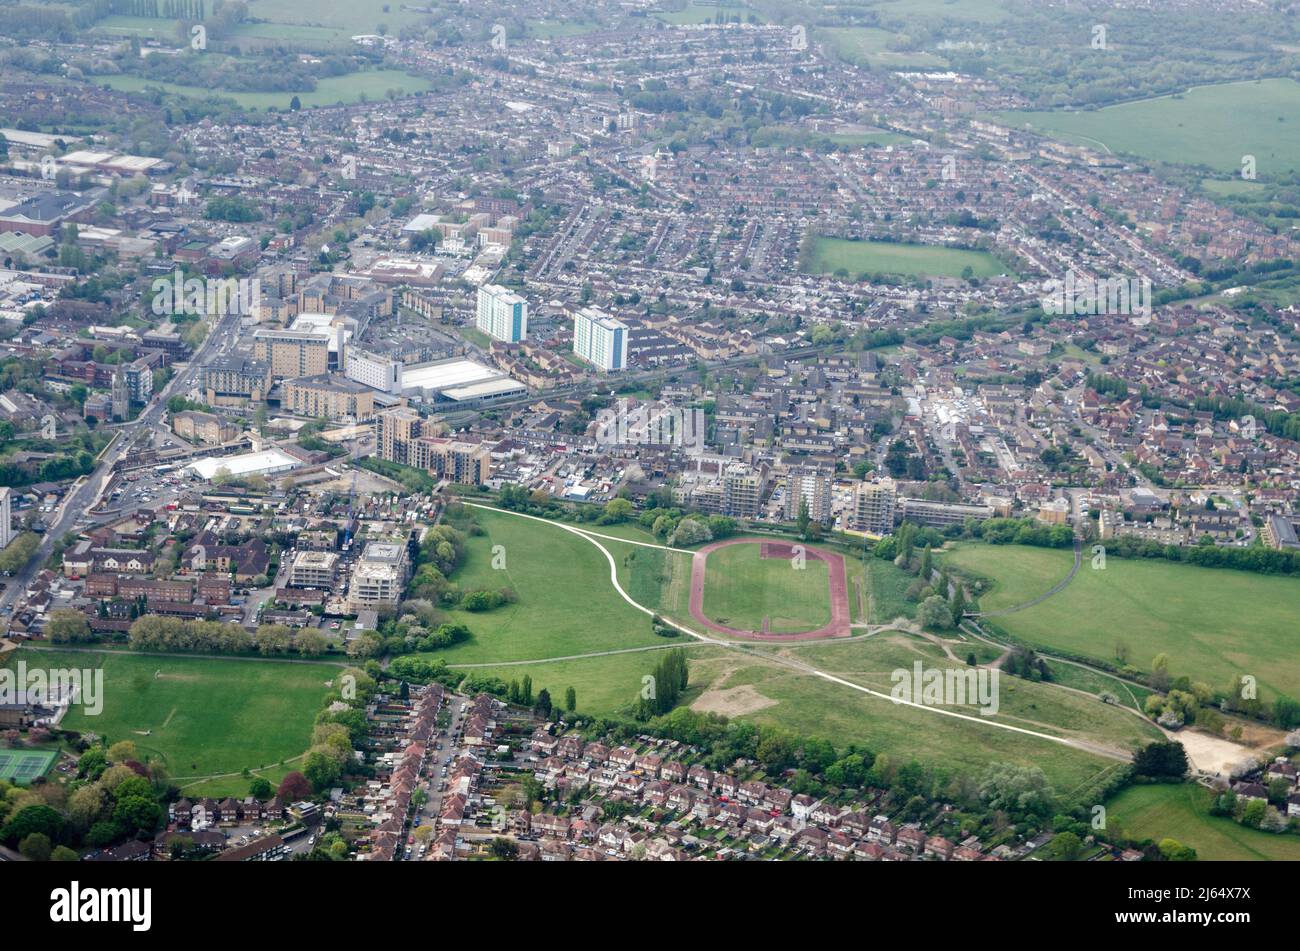 View from above of Feltham Town Centre in Hounslow, West London with the running track, part of Feltham Arenas, in the middle. Stock Photo